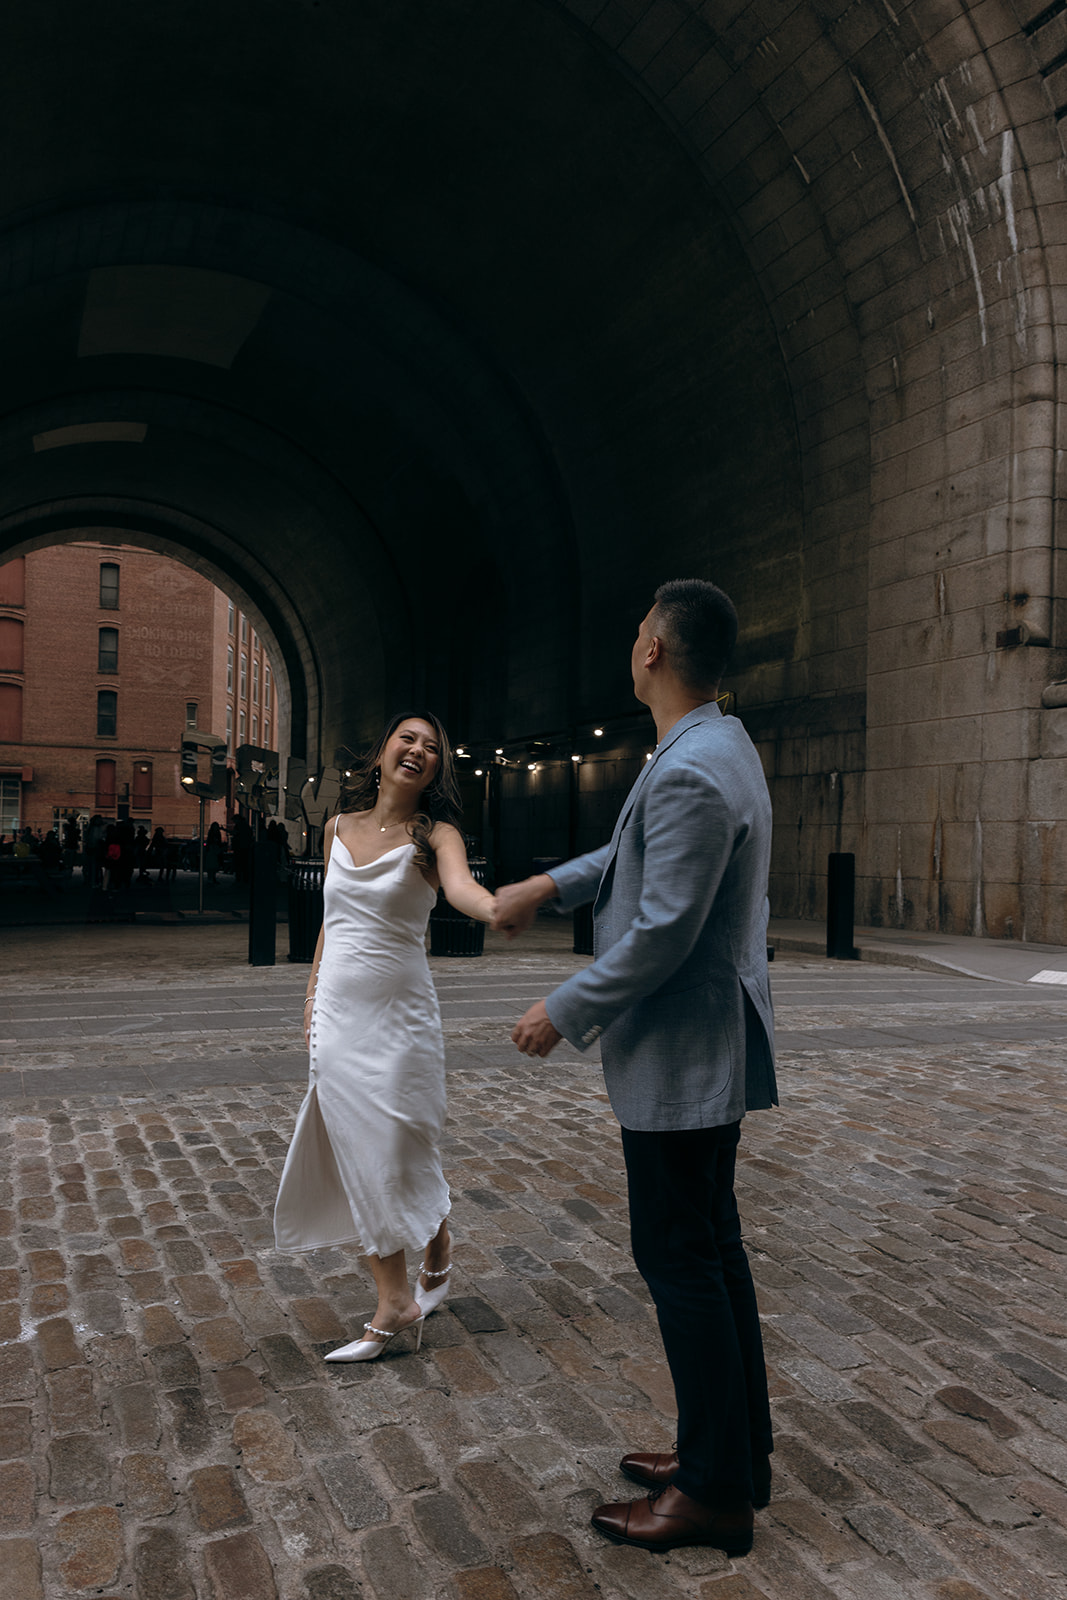 A couple dances in the cobble streets of DUMBO, Brooklyn